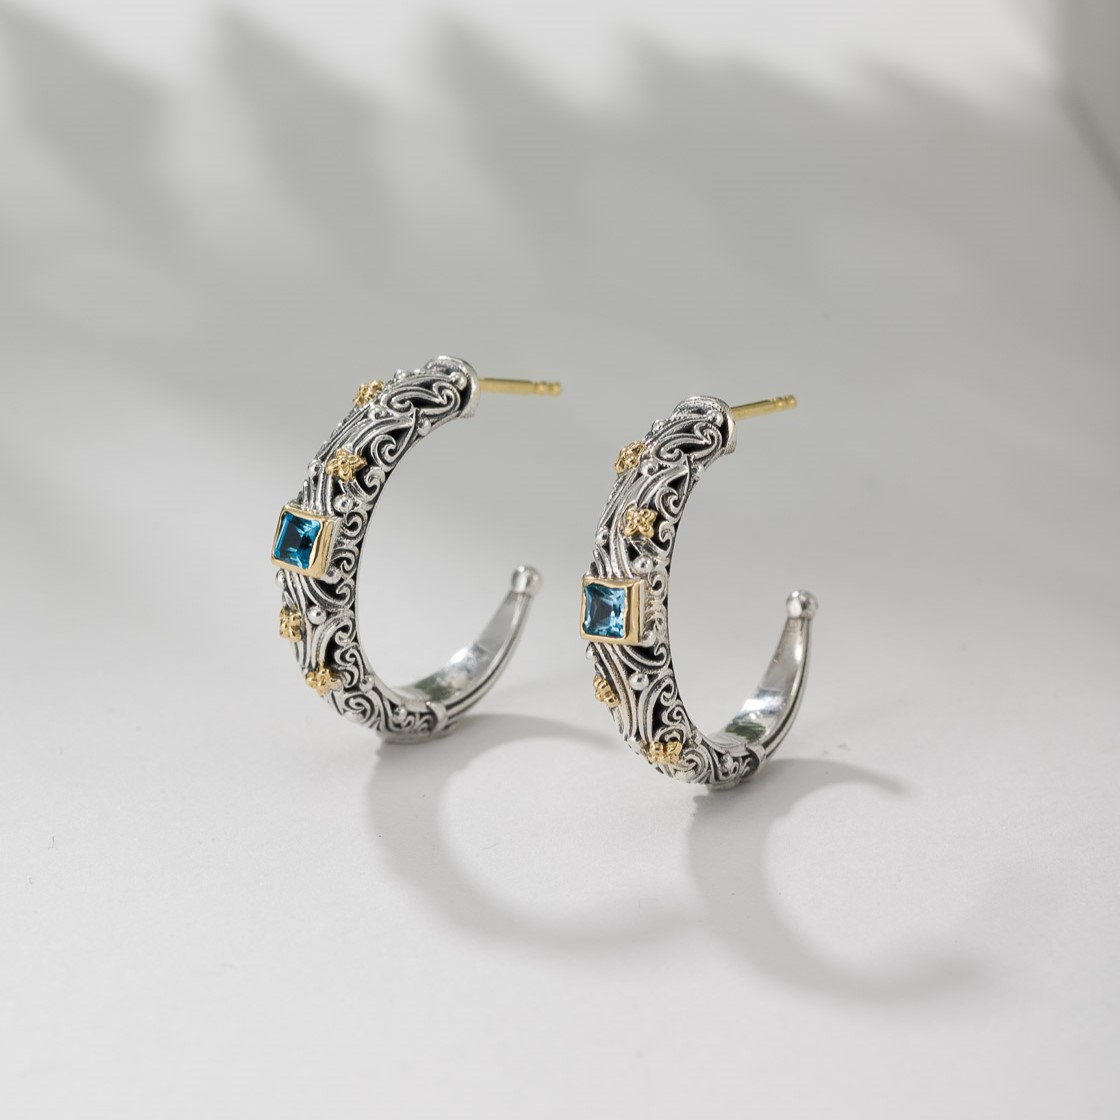 Kynthia Hoops Earrings in 18K Gold and Sterling Silver with Square Semi Precious Stones